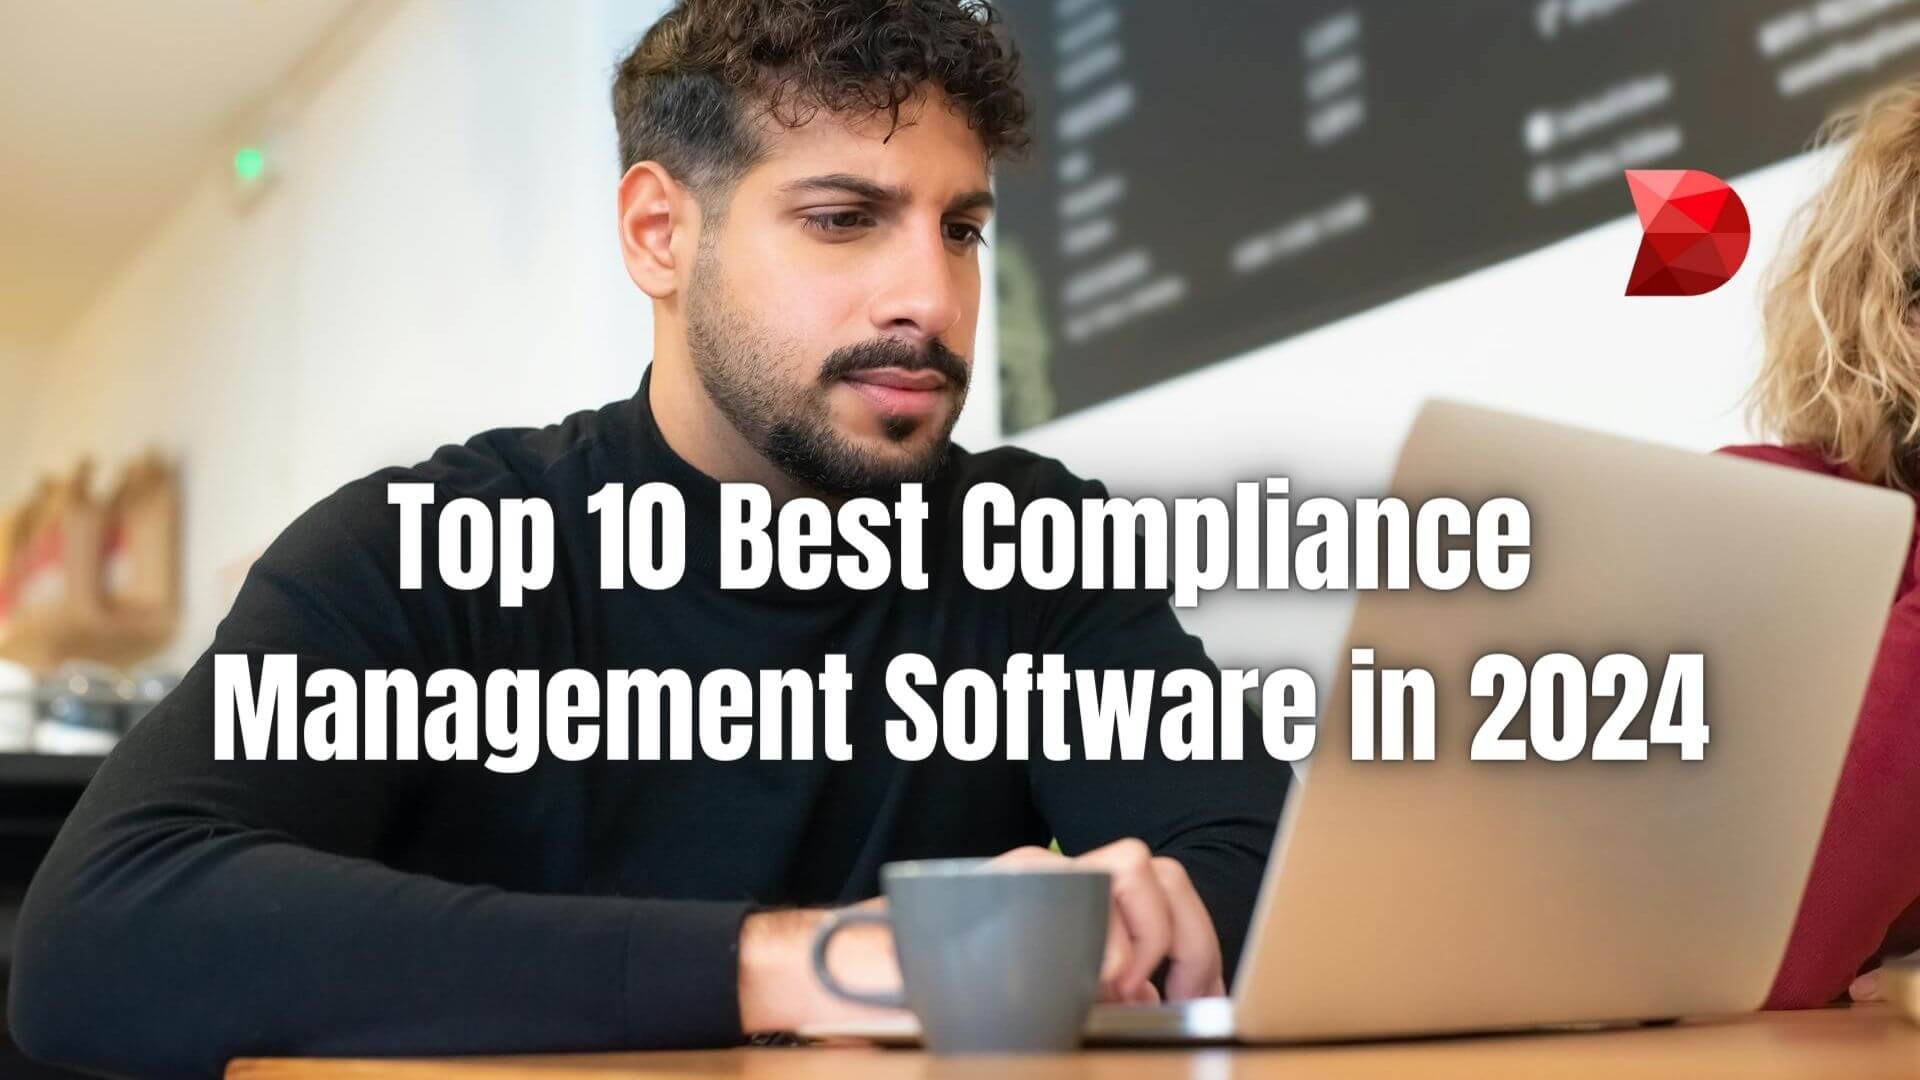 Empower your business with the latest in compliance management software. Explore our top 10 picks for 2024 and streamline your processes.